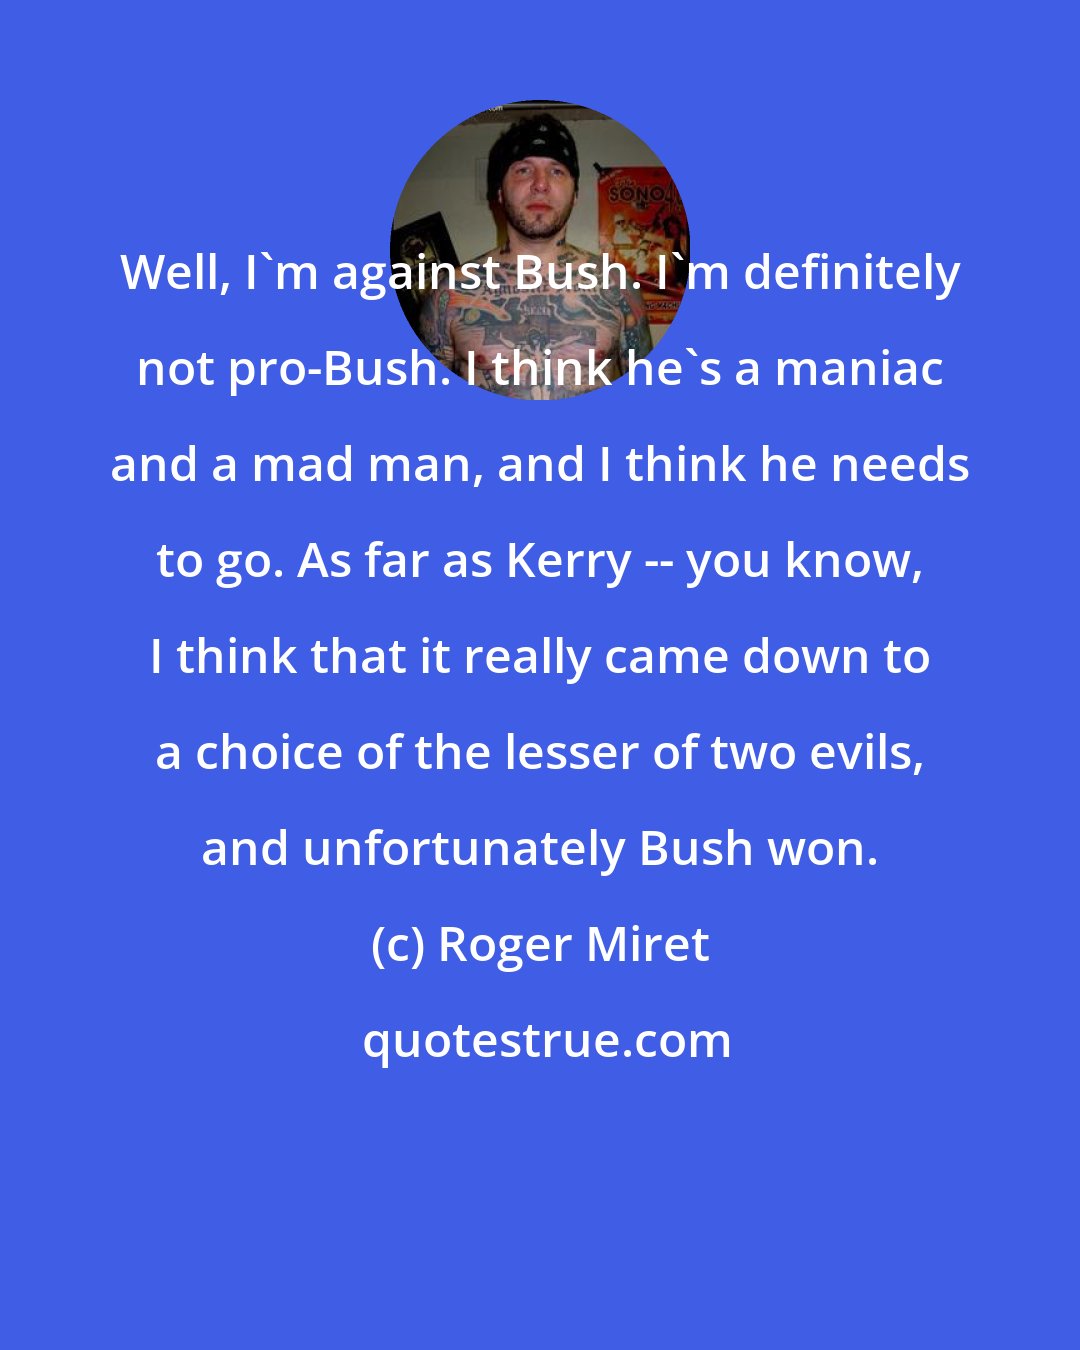 Roger Miret: Well, I'm against Bush. I'm definitely not pro-Bush. I think he's a maniac and a mad man, and I think he needs to go. As far as Kerry -- you know, I think that it really came down to a choice of the lesser of two evils, and unfortunately Bush won.